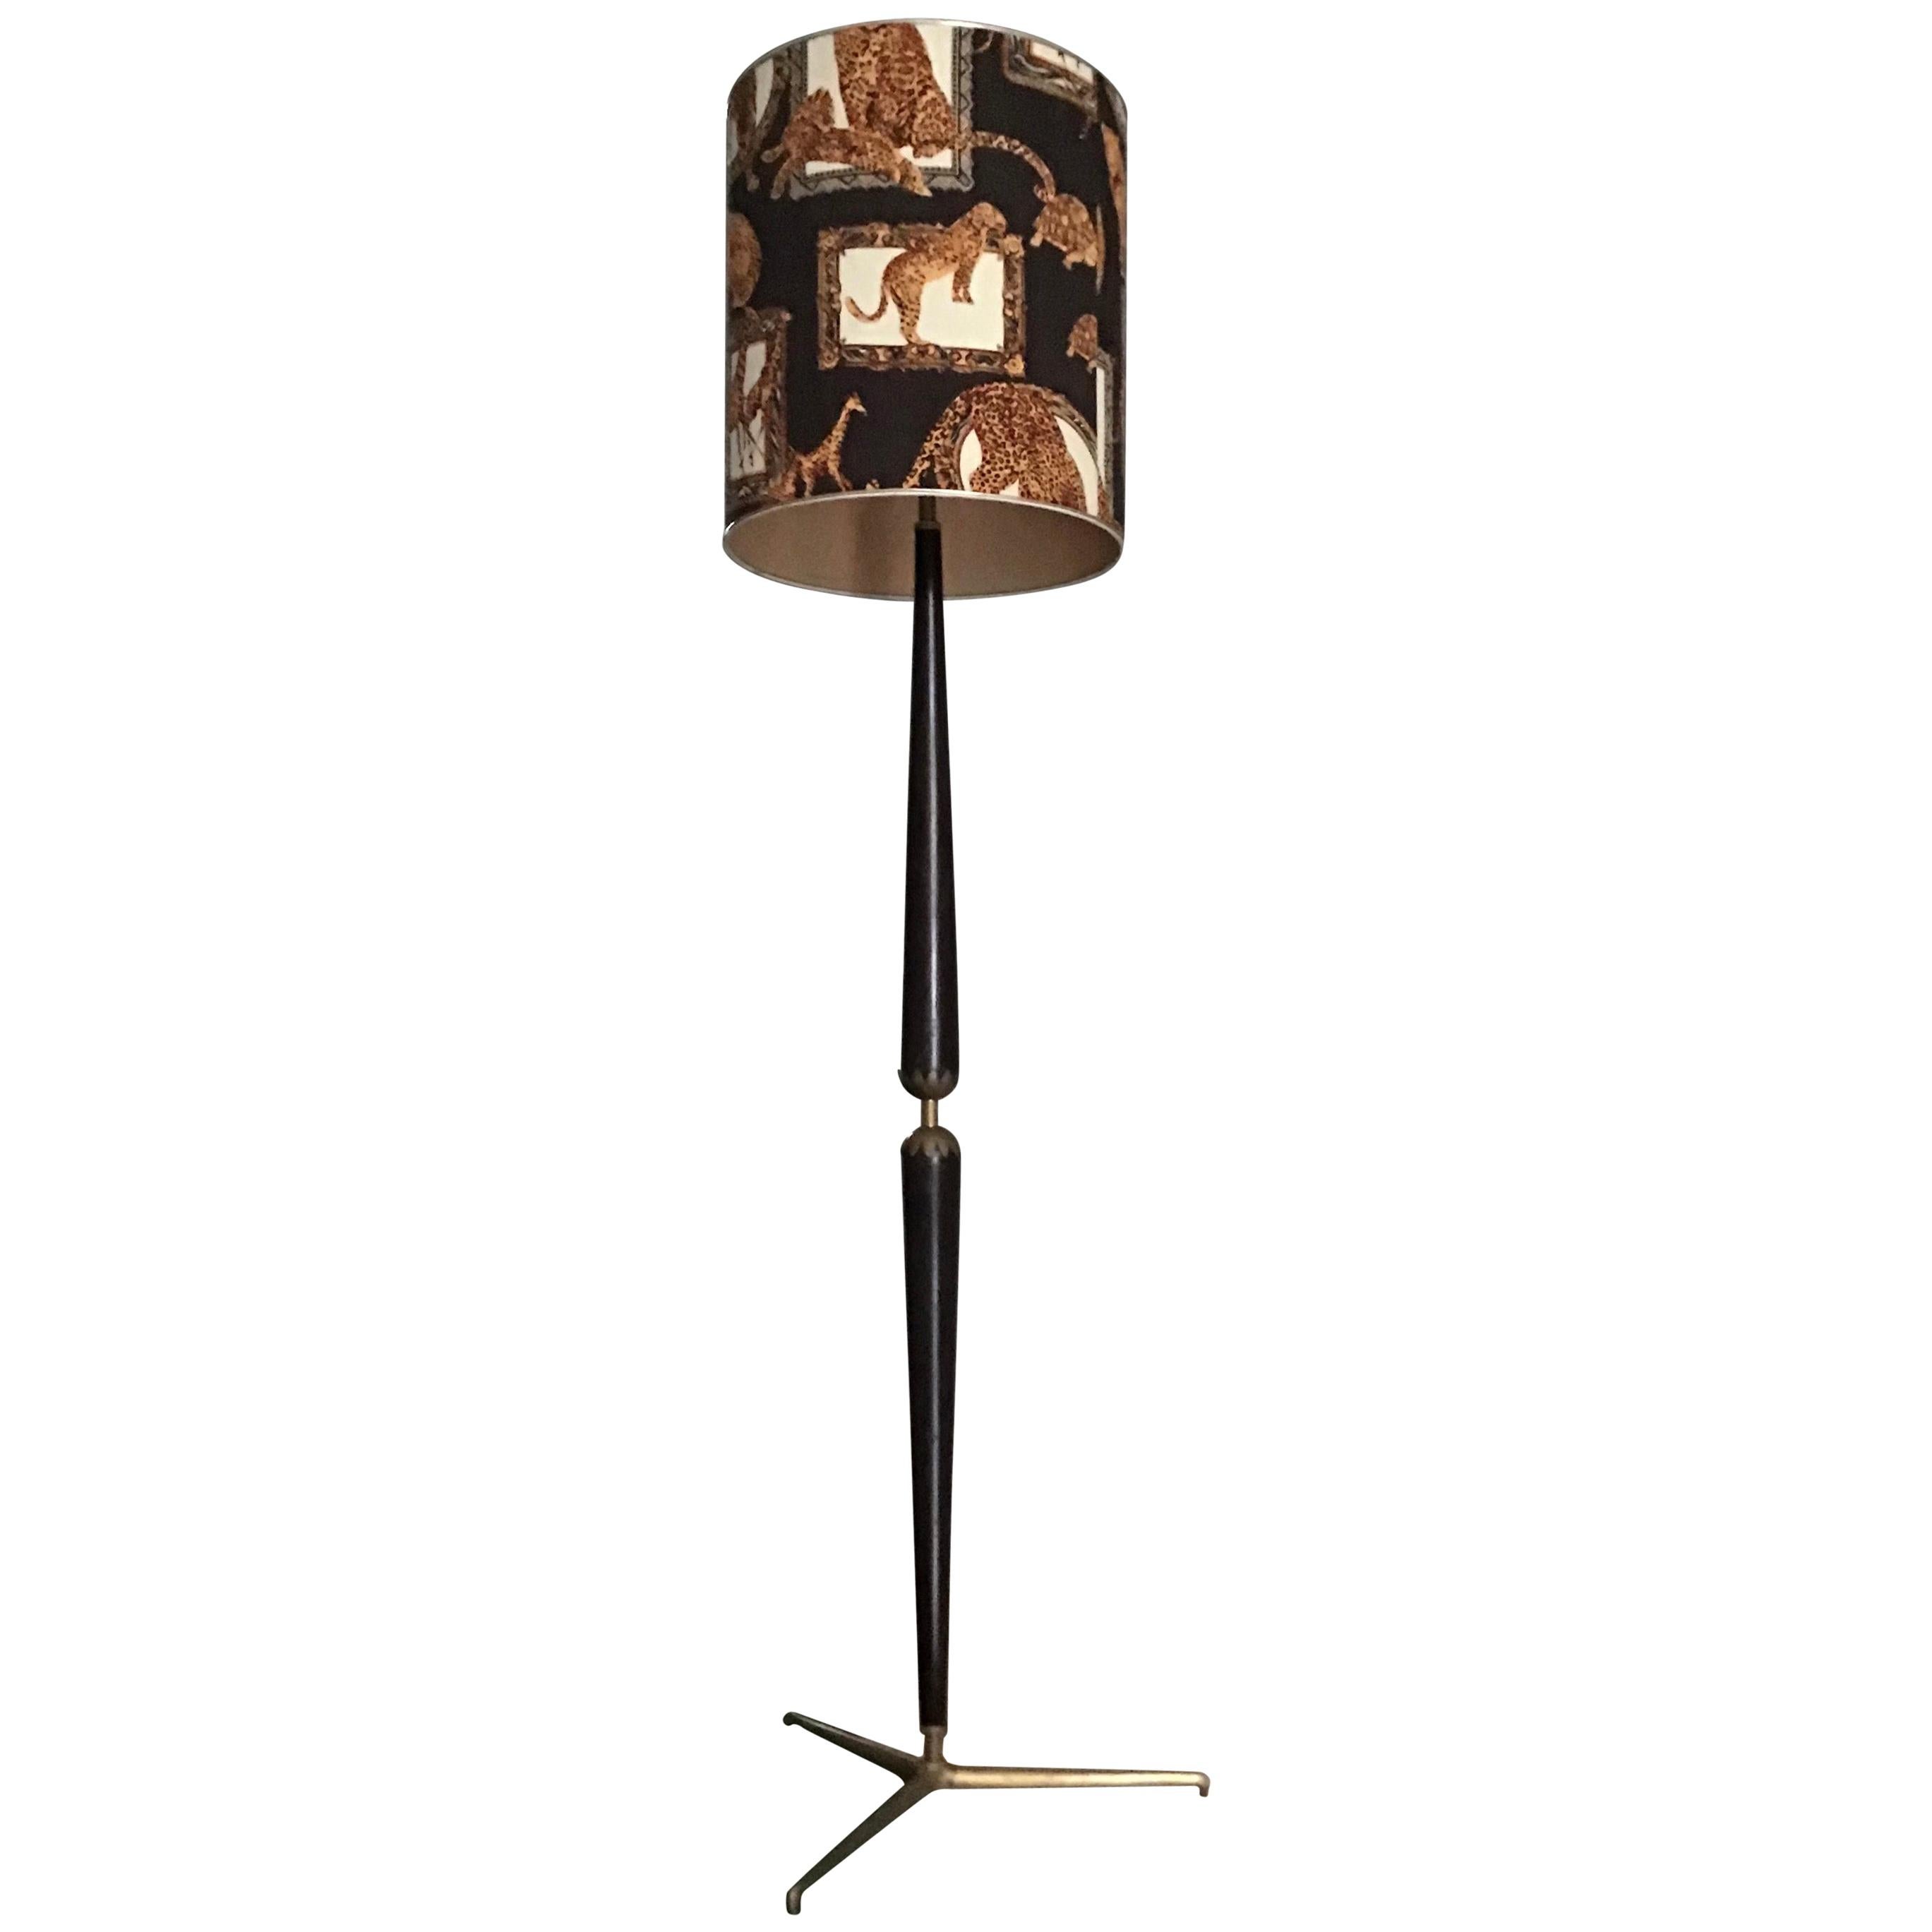 Floor Lamp Ico Parisi #Stile# Wood Brass Fabric Lampshade, 1950, Italy For Sale